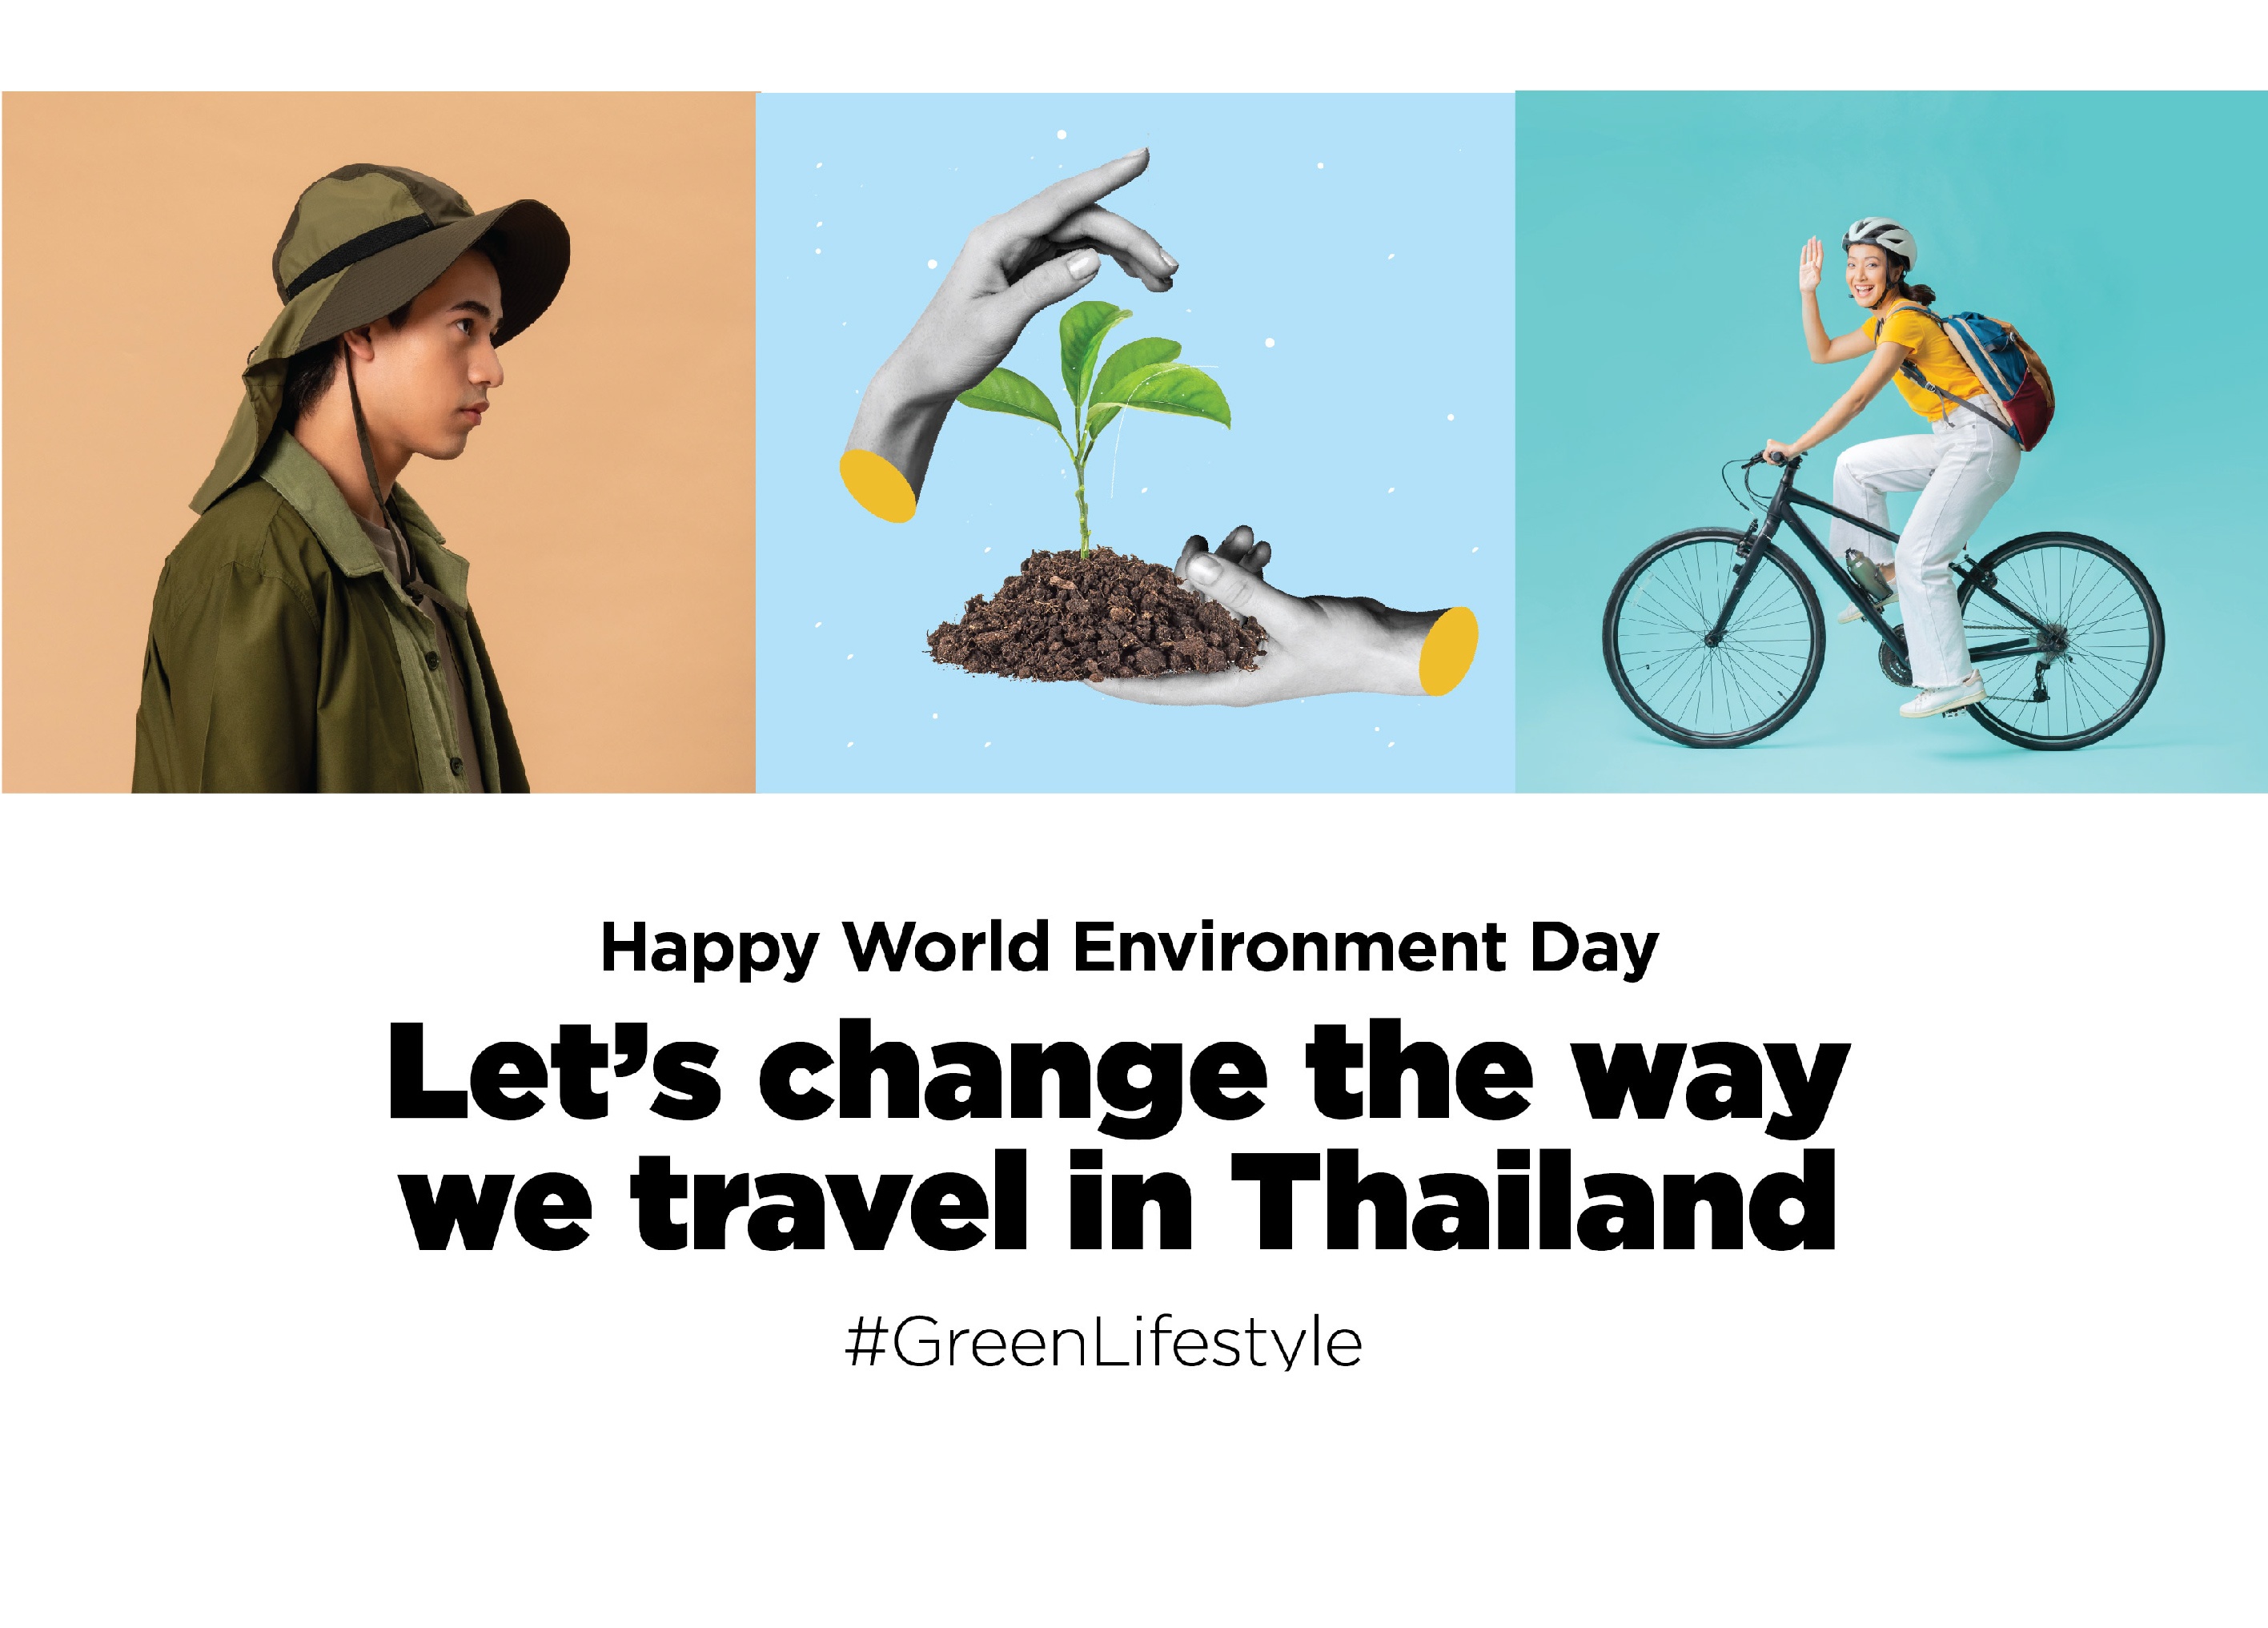 Let’s Change the Way We Travel in Thailand